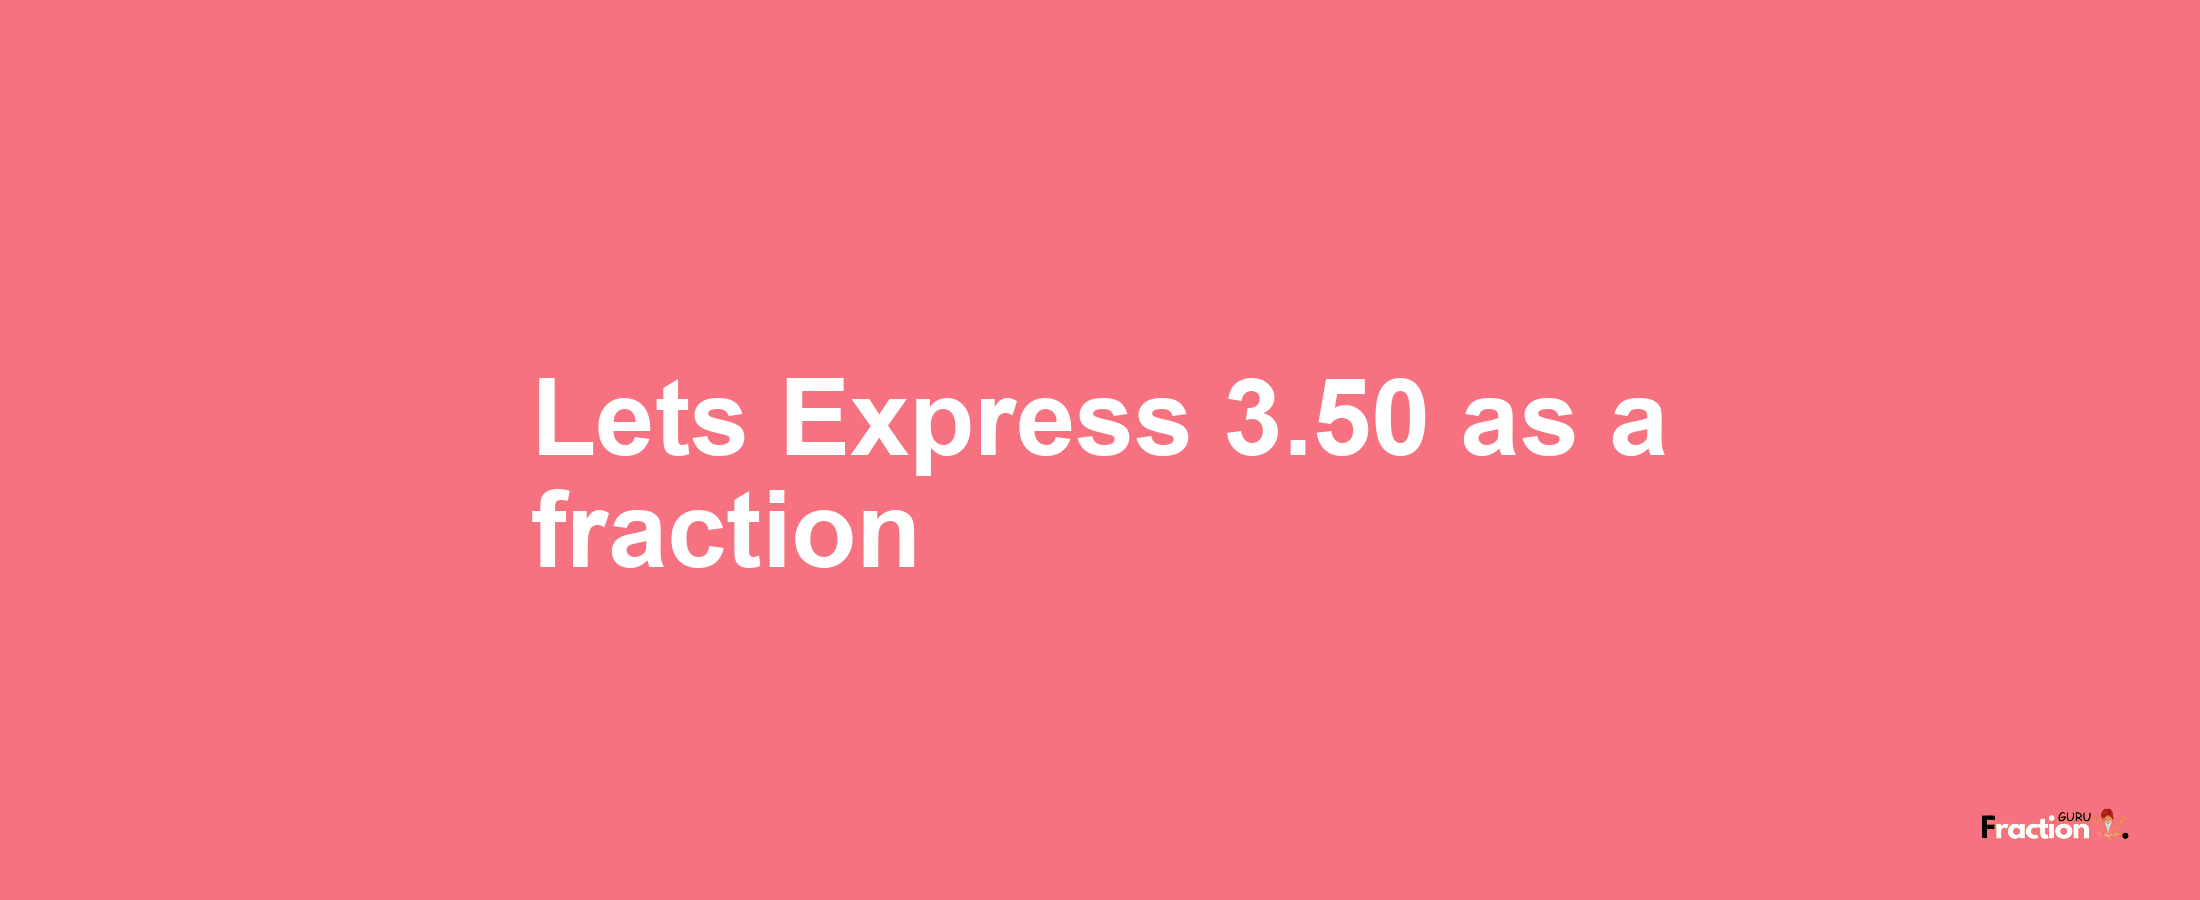 Lets Express 3.50 as afraction